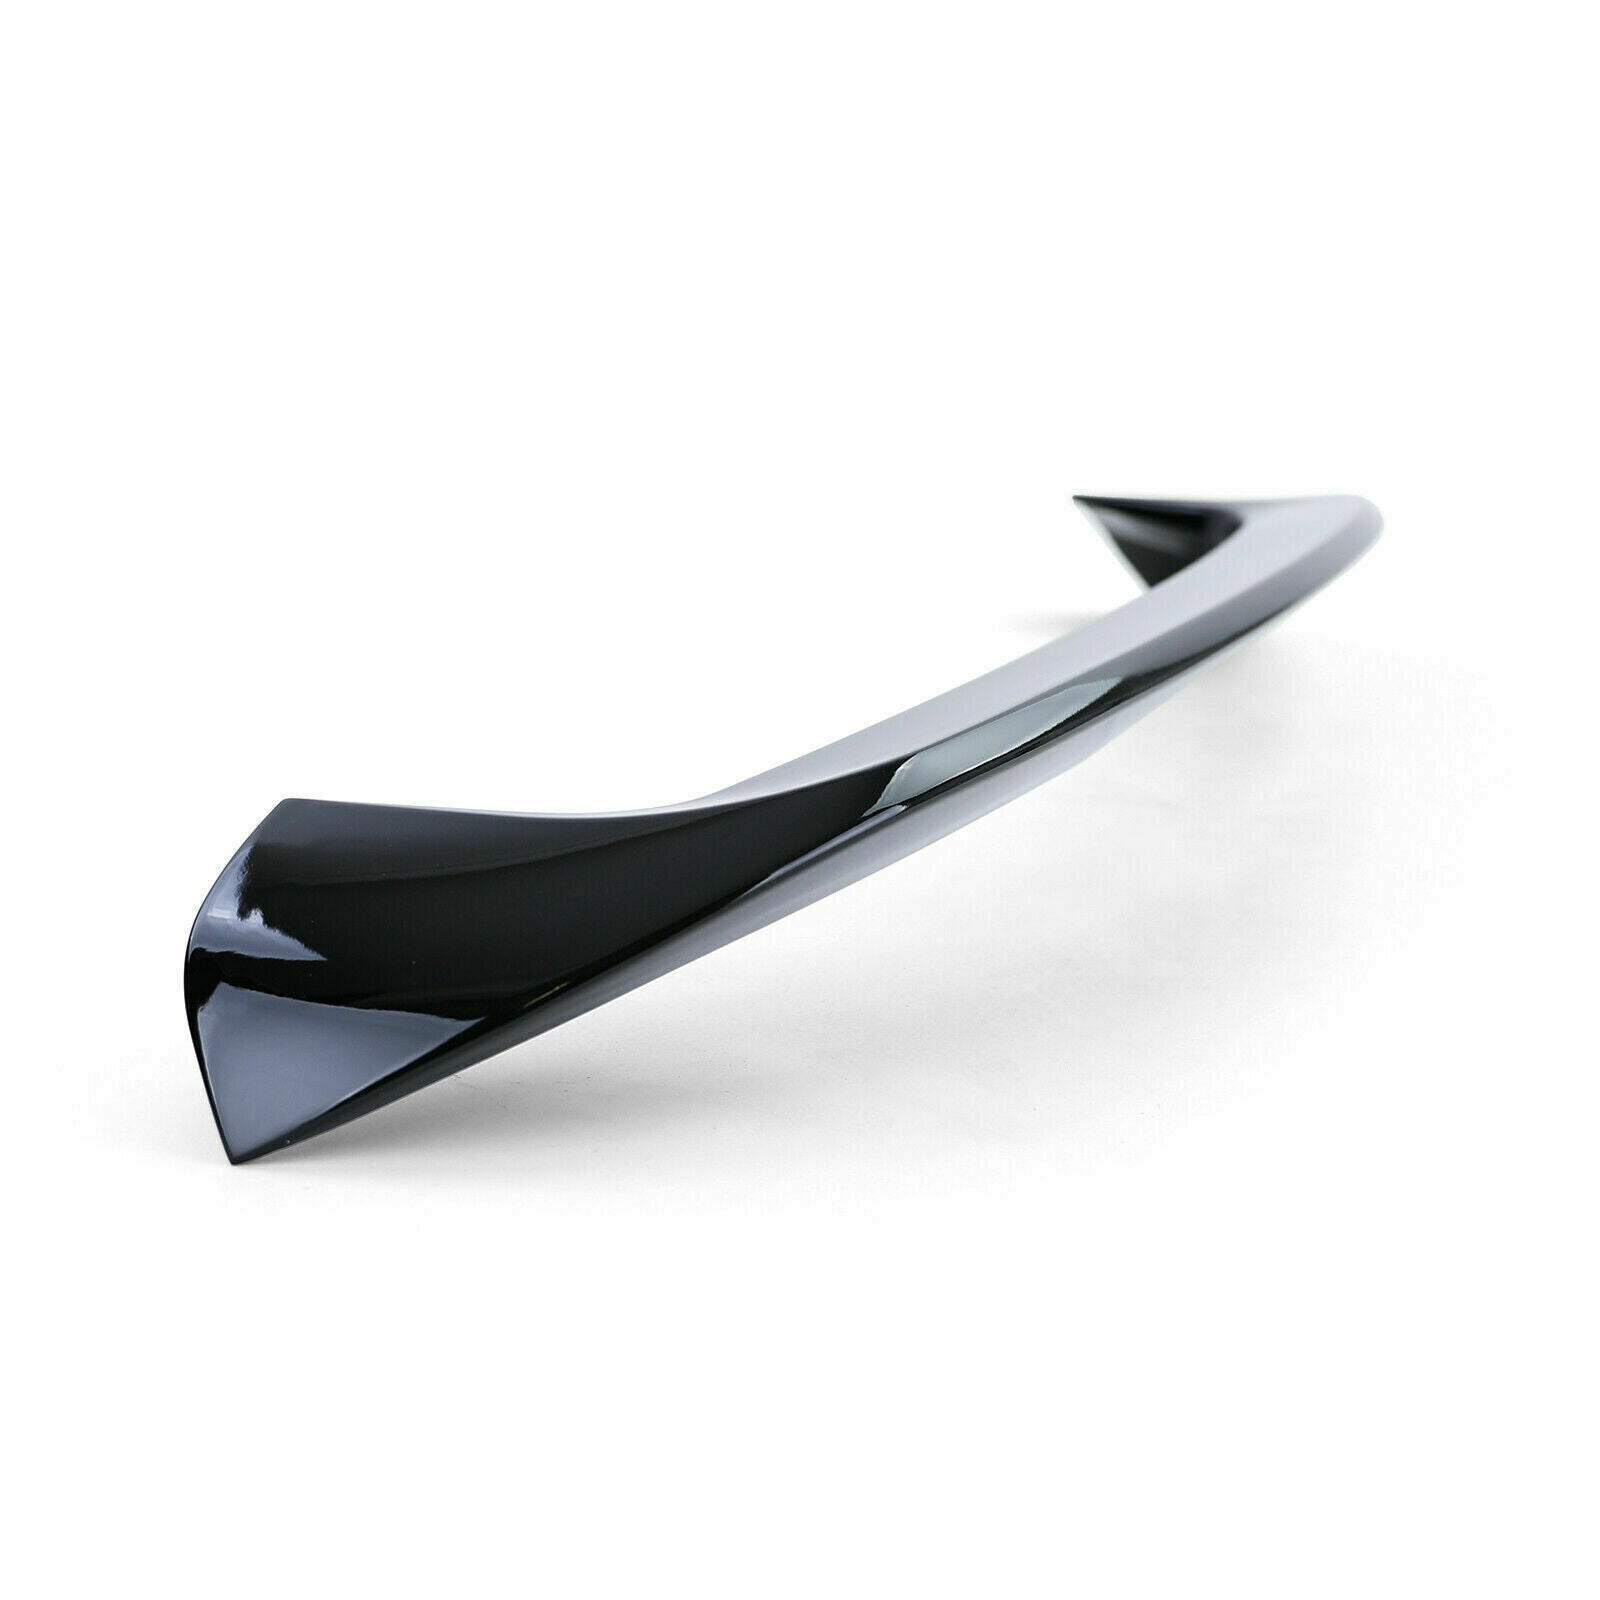 Roof rear spoiler Sport Black Gloss for BMW 1 Series F20 F21 pre